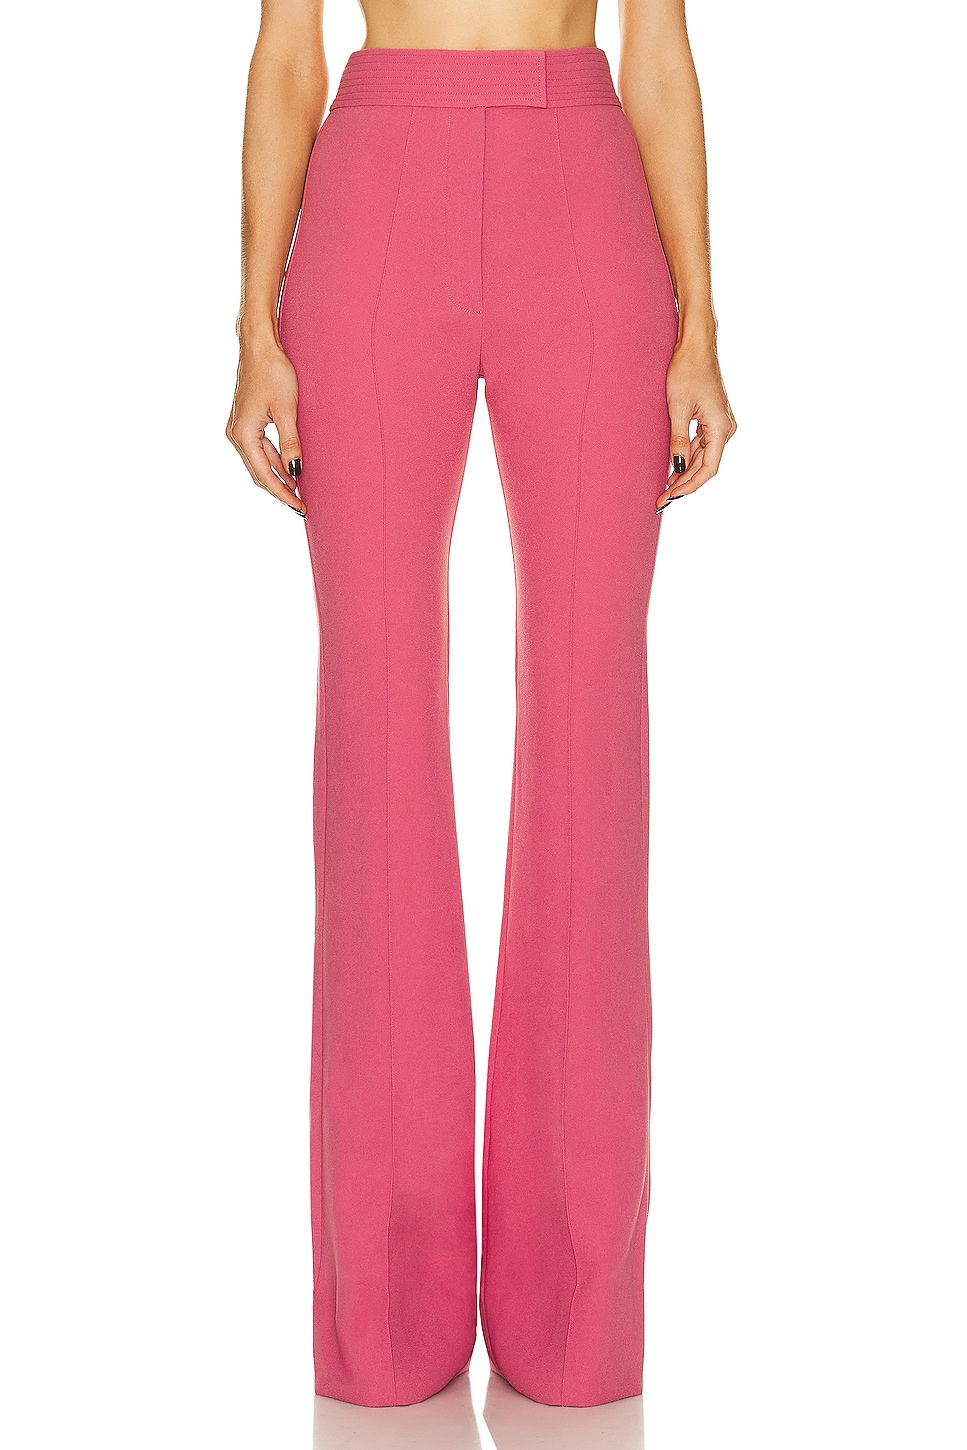 Image 1 of Alex Perry Flare Trouser in Garnet Rose